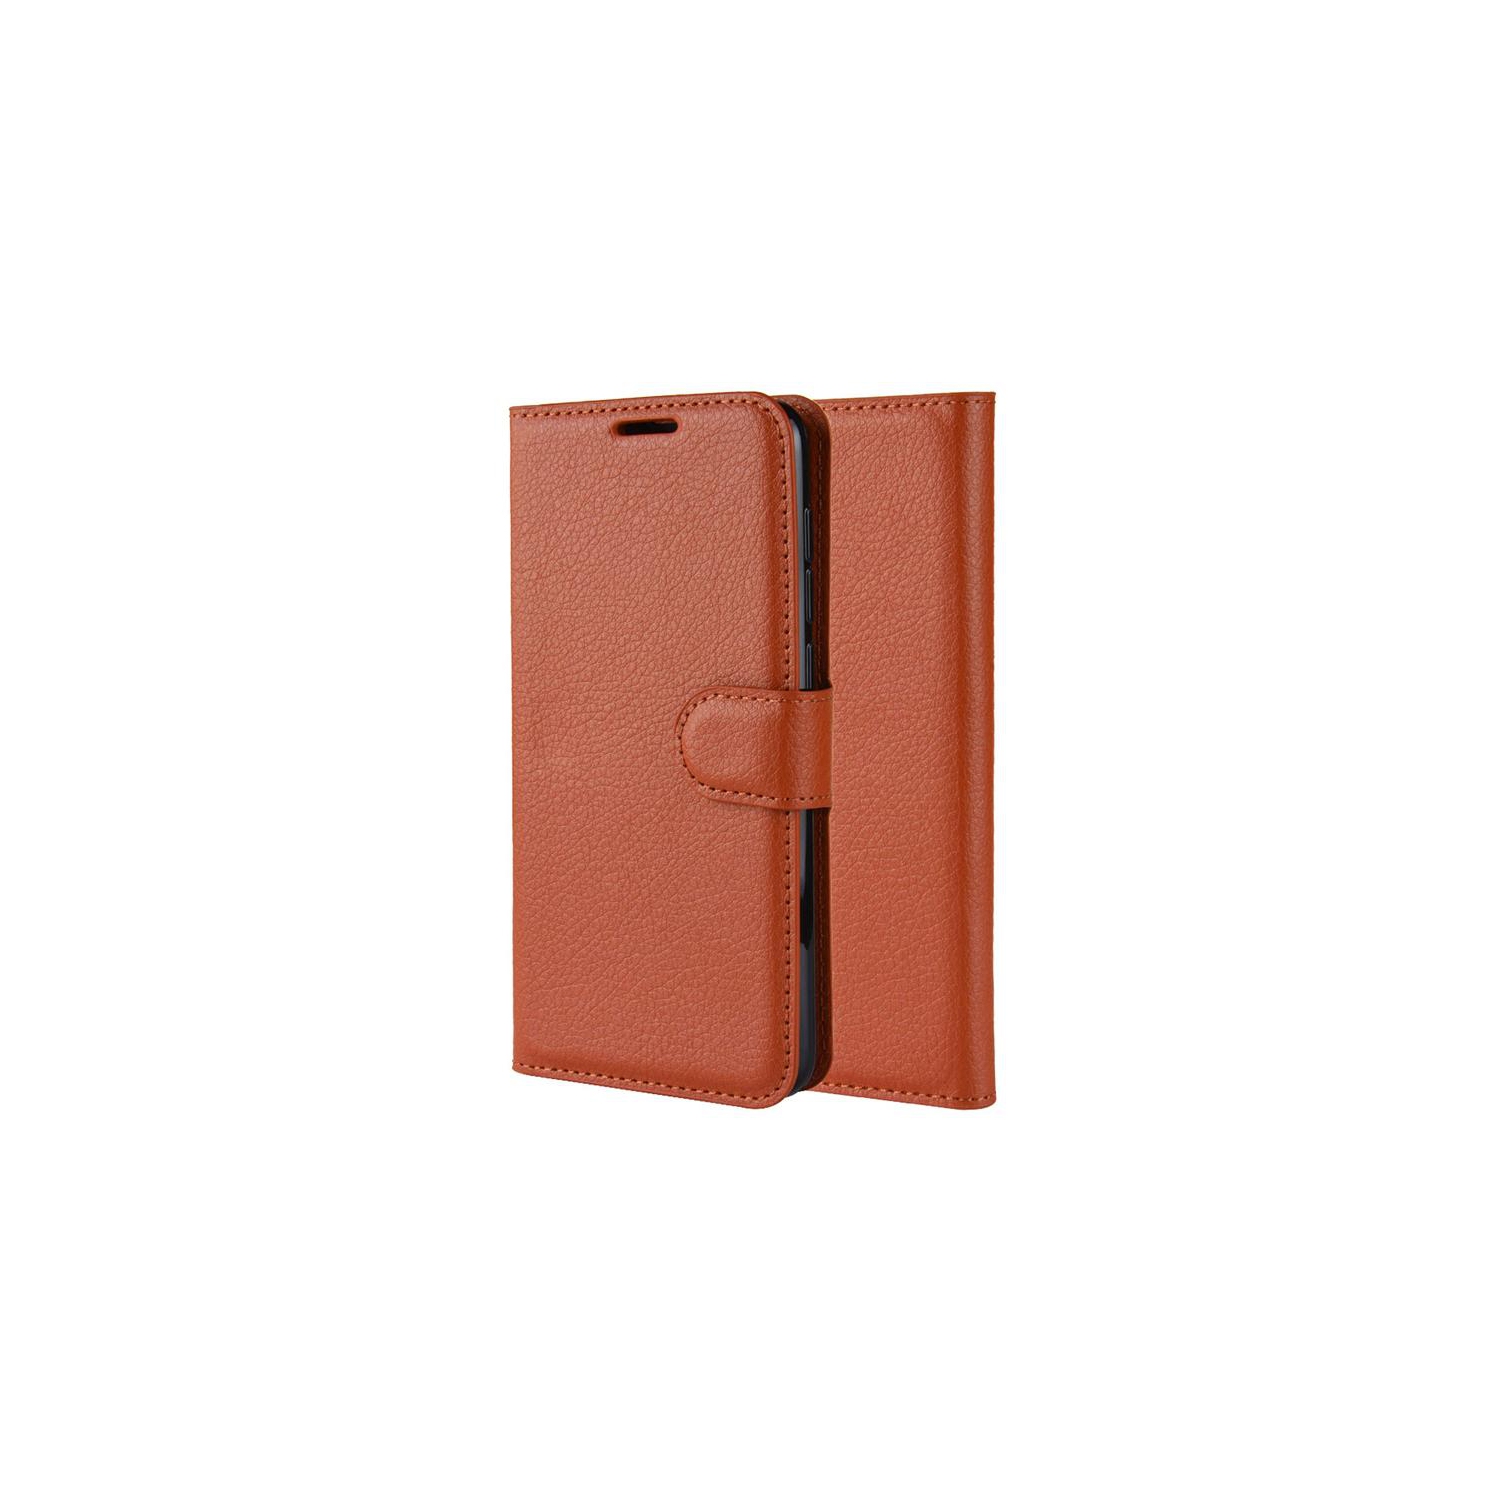 PANDACO Brown Leather Wallet Case for iPhone 13 Mini